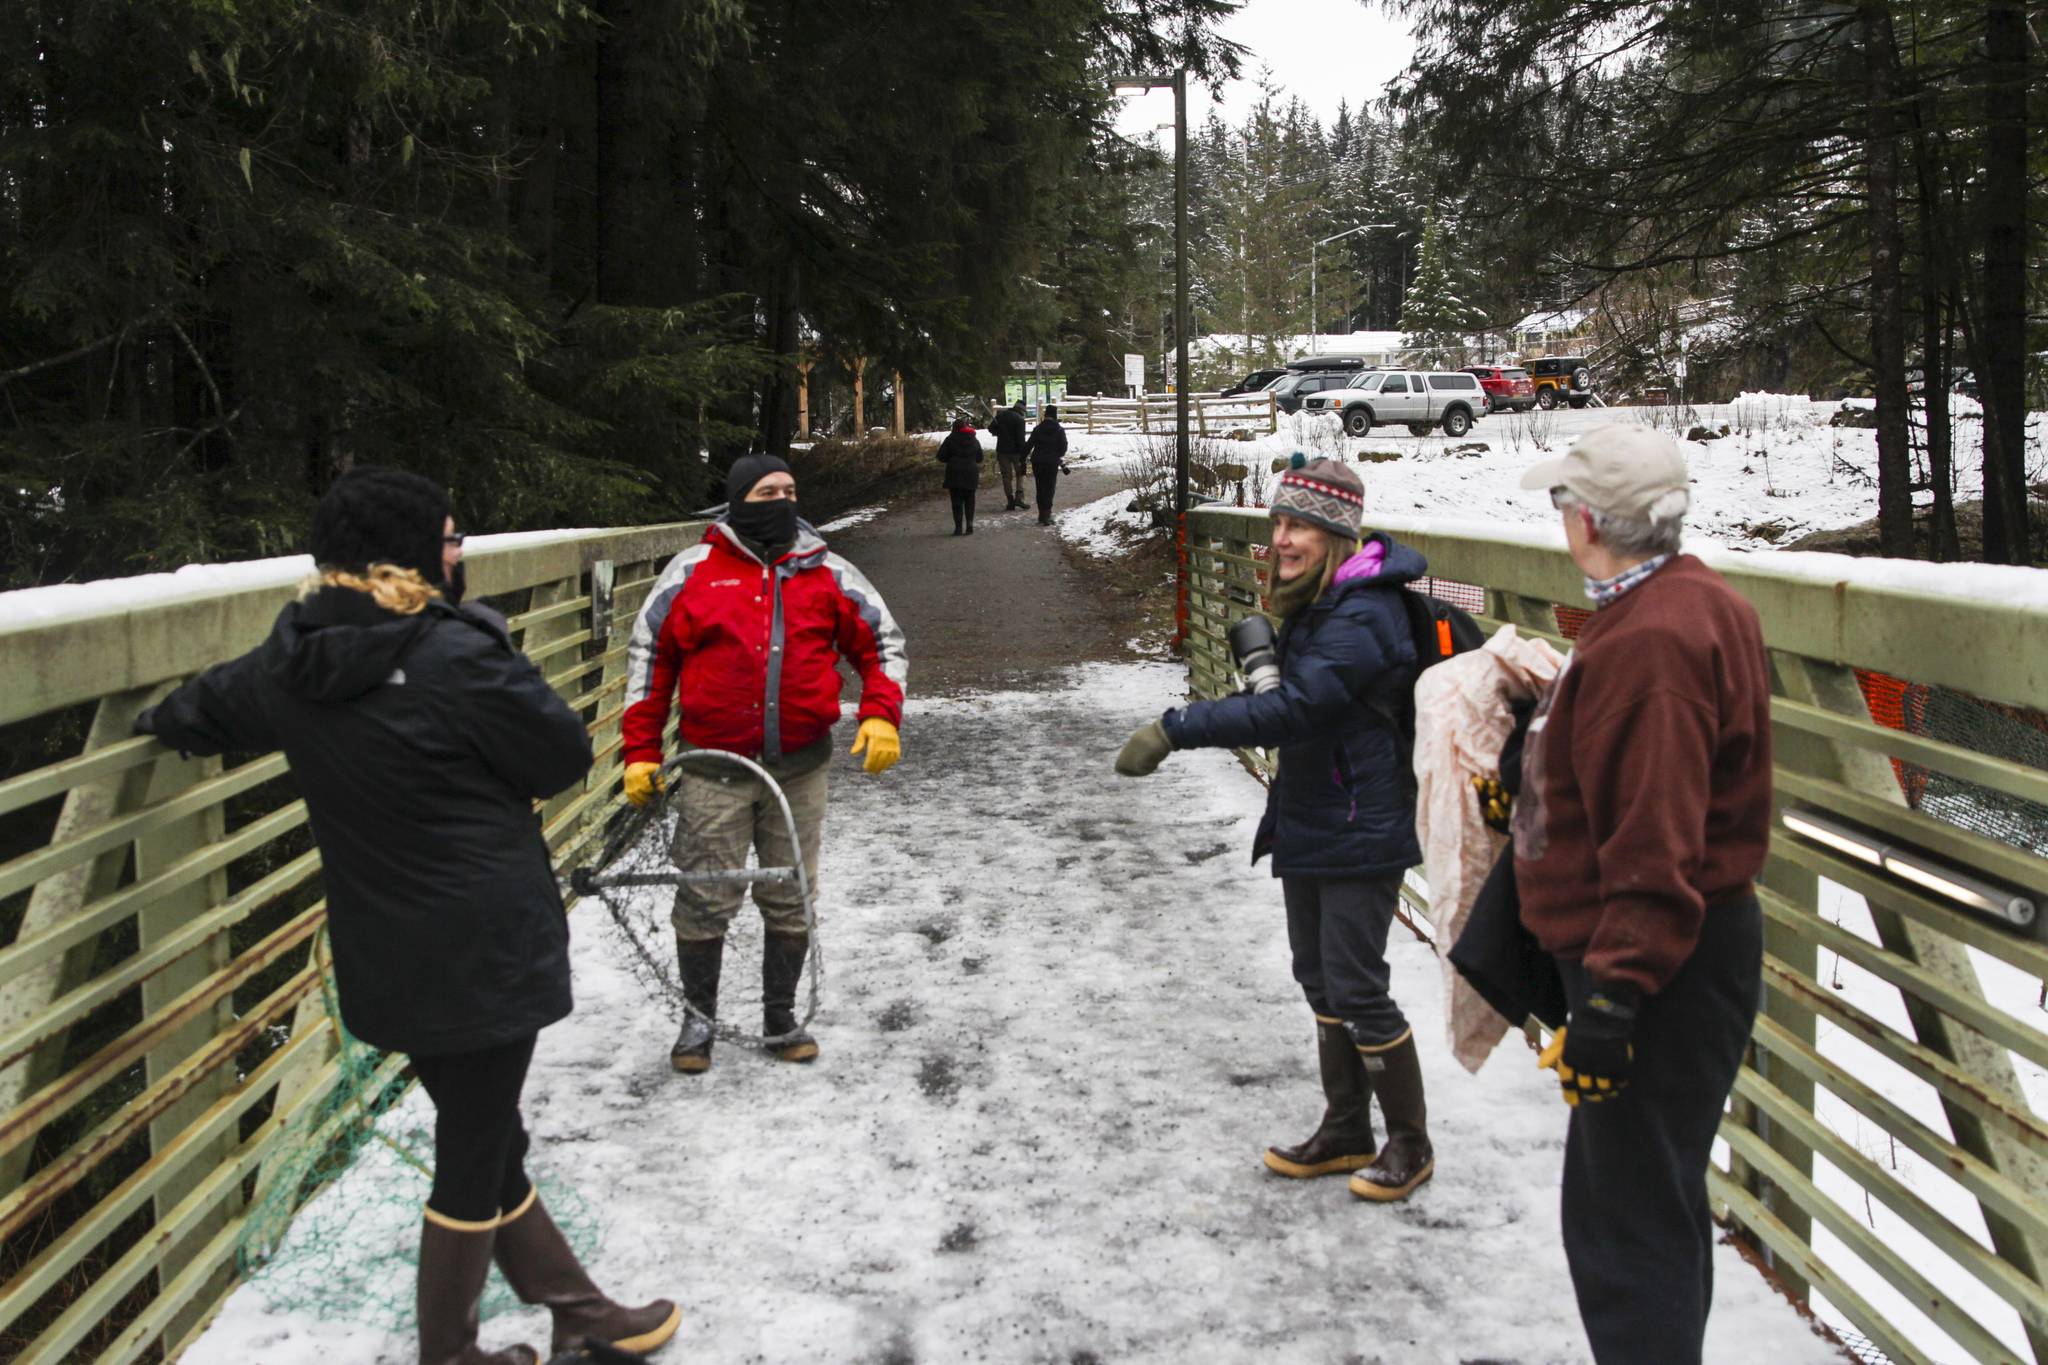 Helpers have an afteraction Juneau Raptor Center manager Kathy Benner, far left, after an attempt to capture a trumpeter swan with an injured wing at Auke Lake on Jan. 28, 2021. (Michael S. Lockett / Juneau Empire)